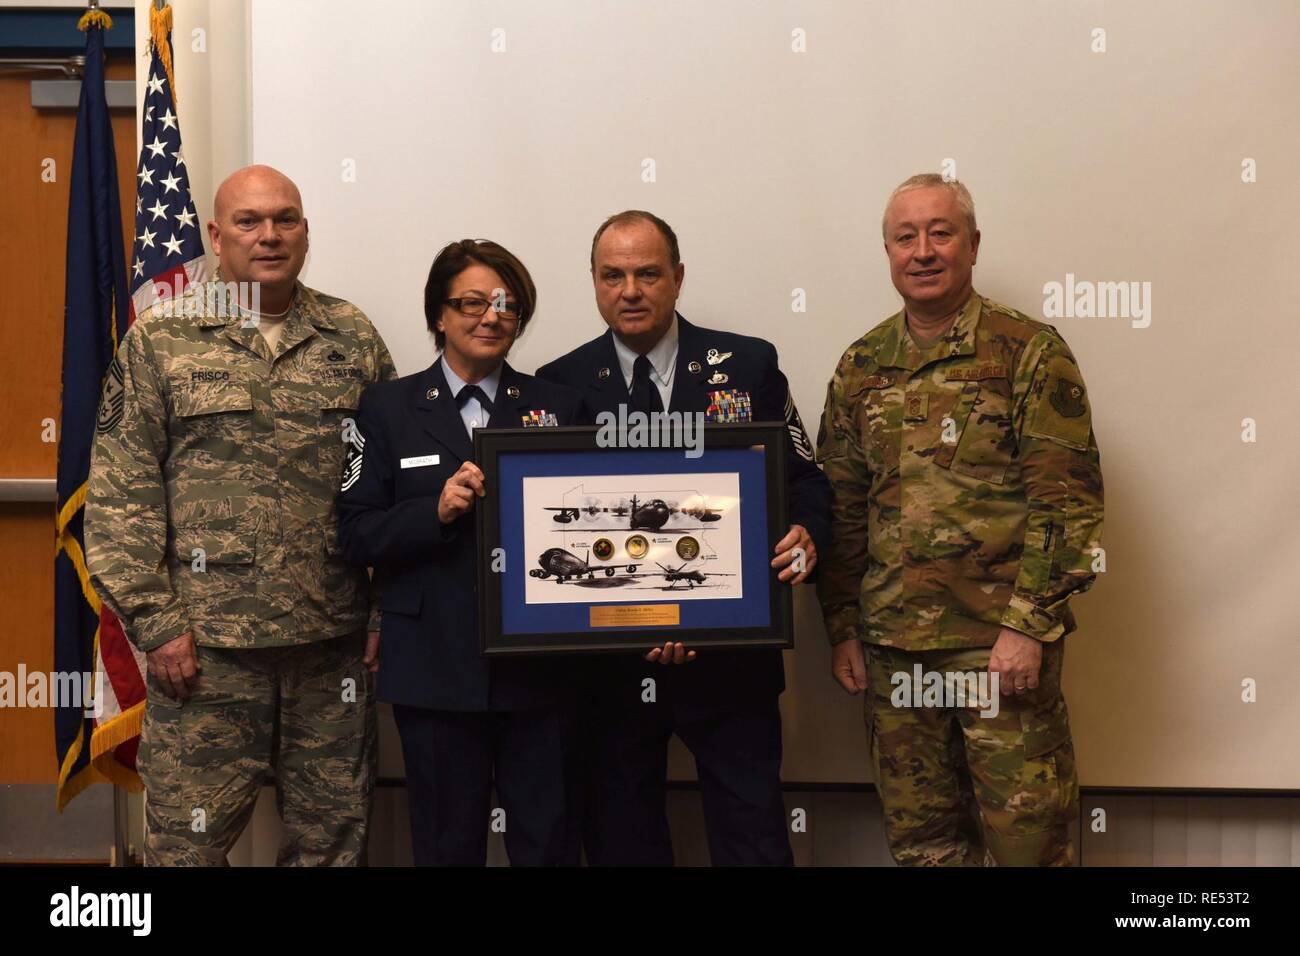 Retired Command Chief Master Sgt. Randy E. Miller celebrates the accomplishments of his career at 171st Air Refueling Wing with family and friends Jan. 6, 2019. In attendance to celebrate with Miller was Col. Mark A. Goodwill, Commander of the 171st Air Refueling Wing, Maj. Gen. Anthony J. Carrelli, The Adjutant General of Pennsylvania and Brig. Gen. Michael J. Regan, Deputy Adjutant General - Air. Replacing Miller as Command Chief is Chief Master Sgt. Judith McGrath. Stock Photo